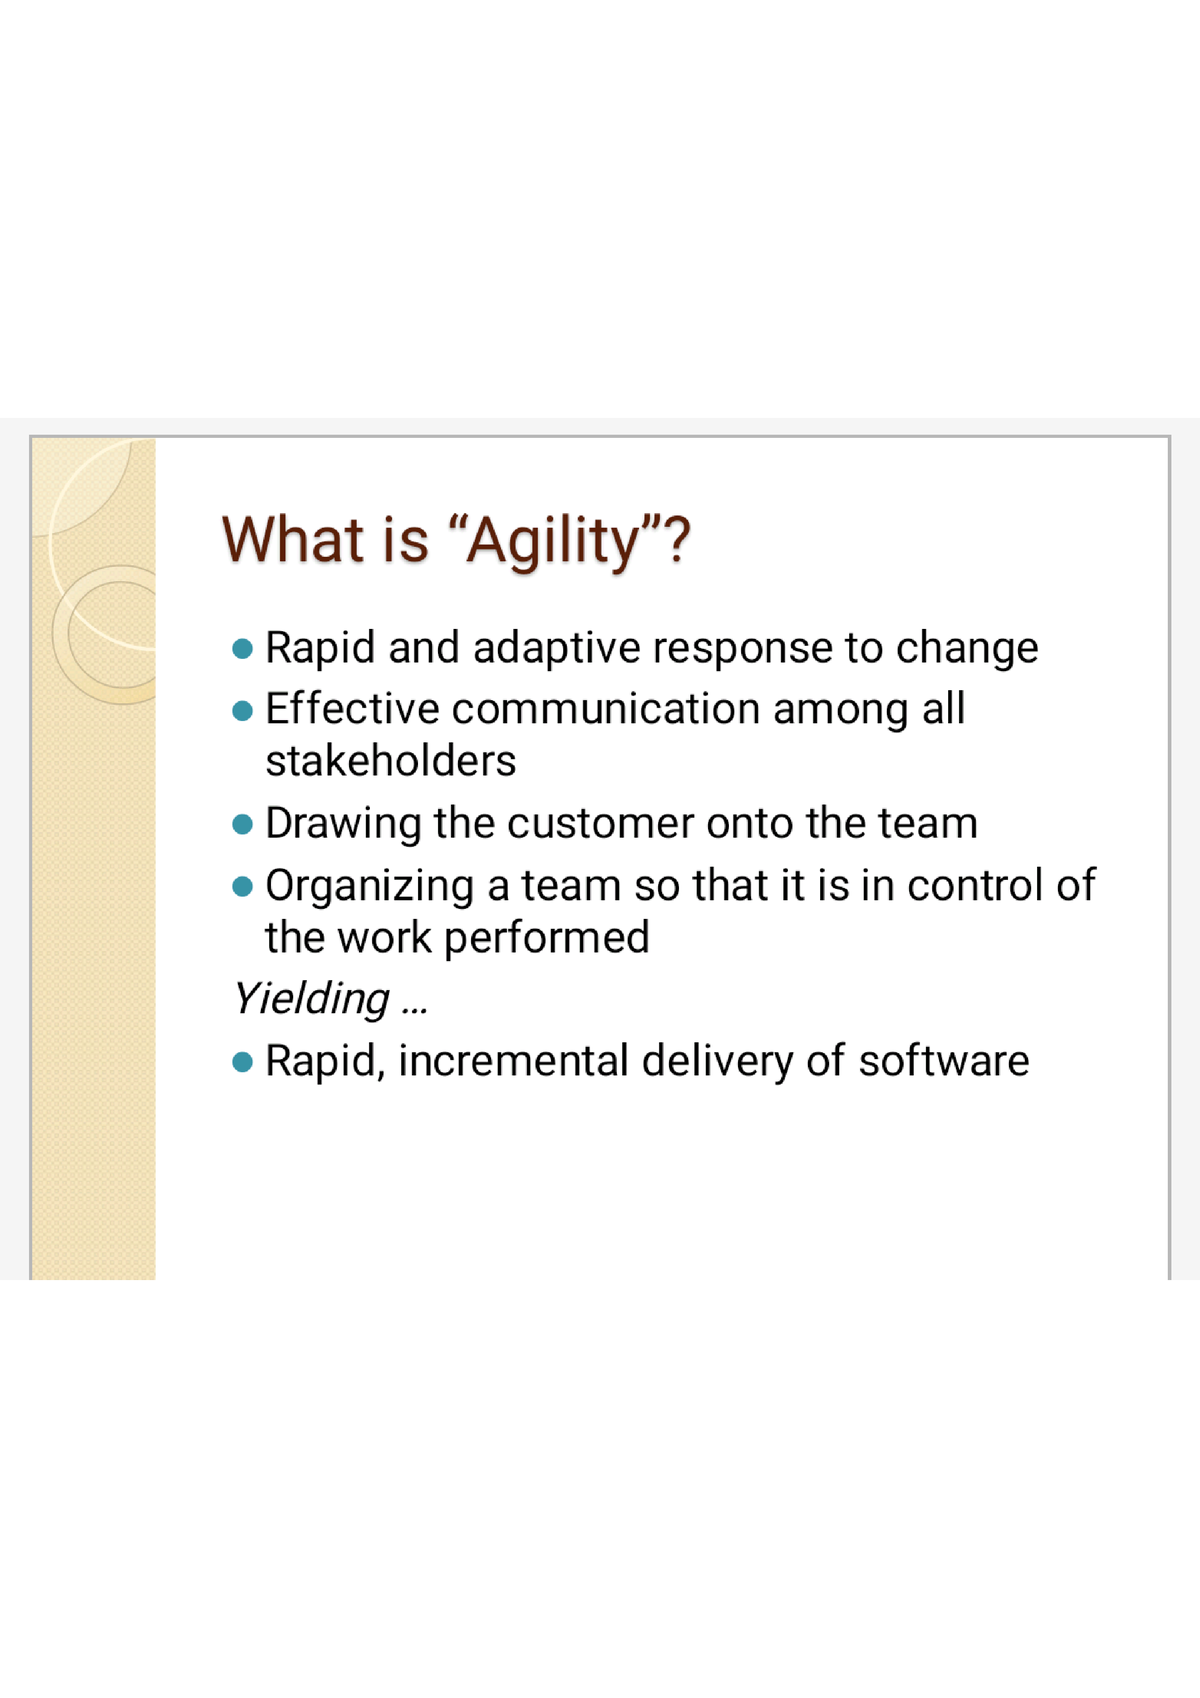 What is agility?